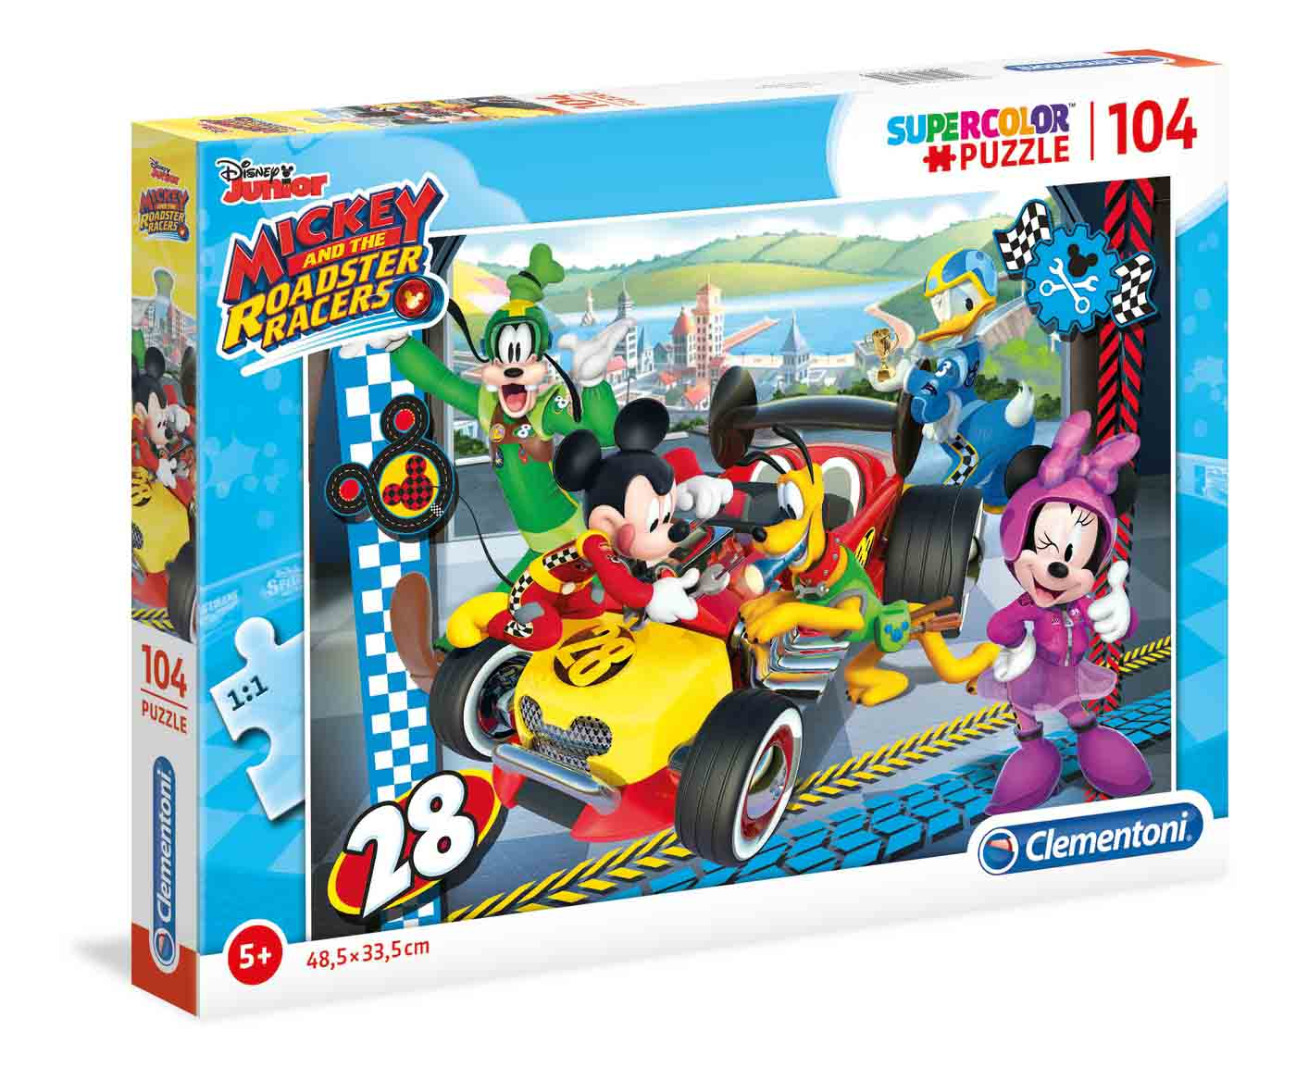 Disney Mickey and The Roadster Racers - 104 peças - Supercolor Puzzle (6+)